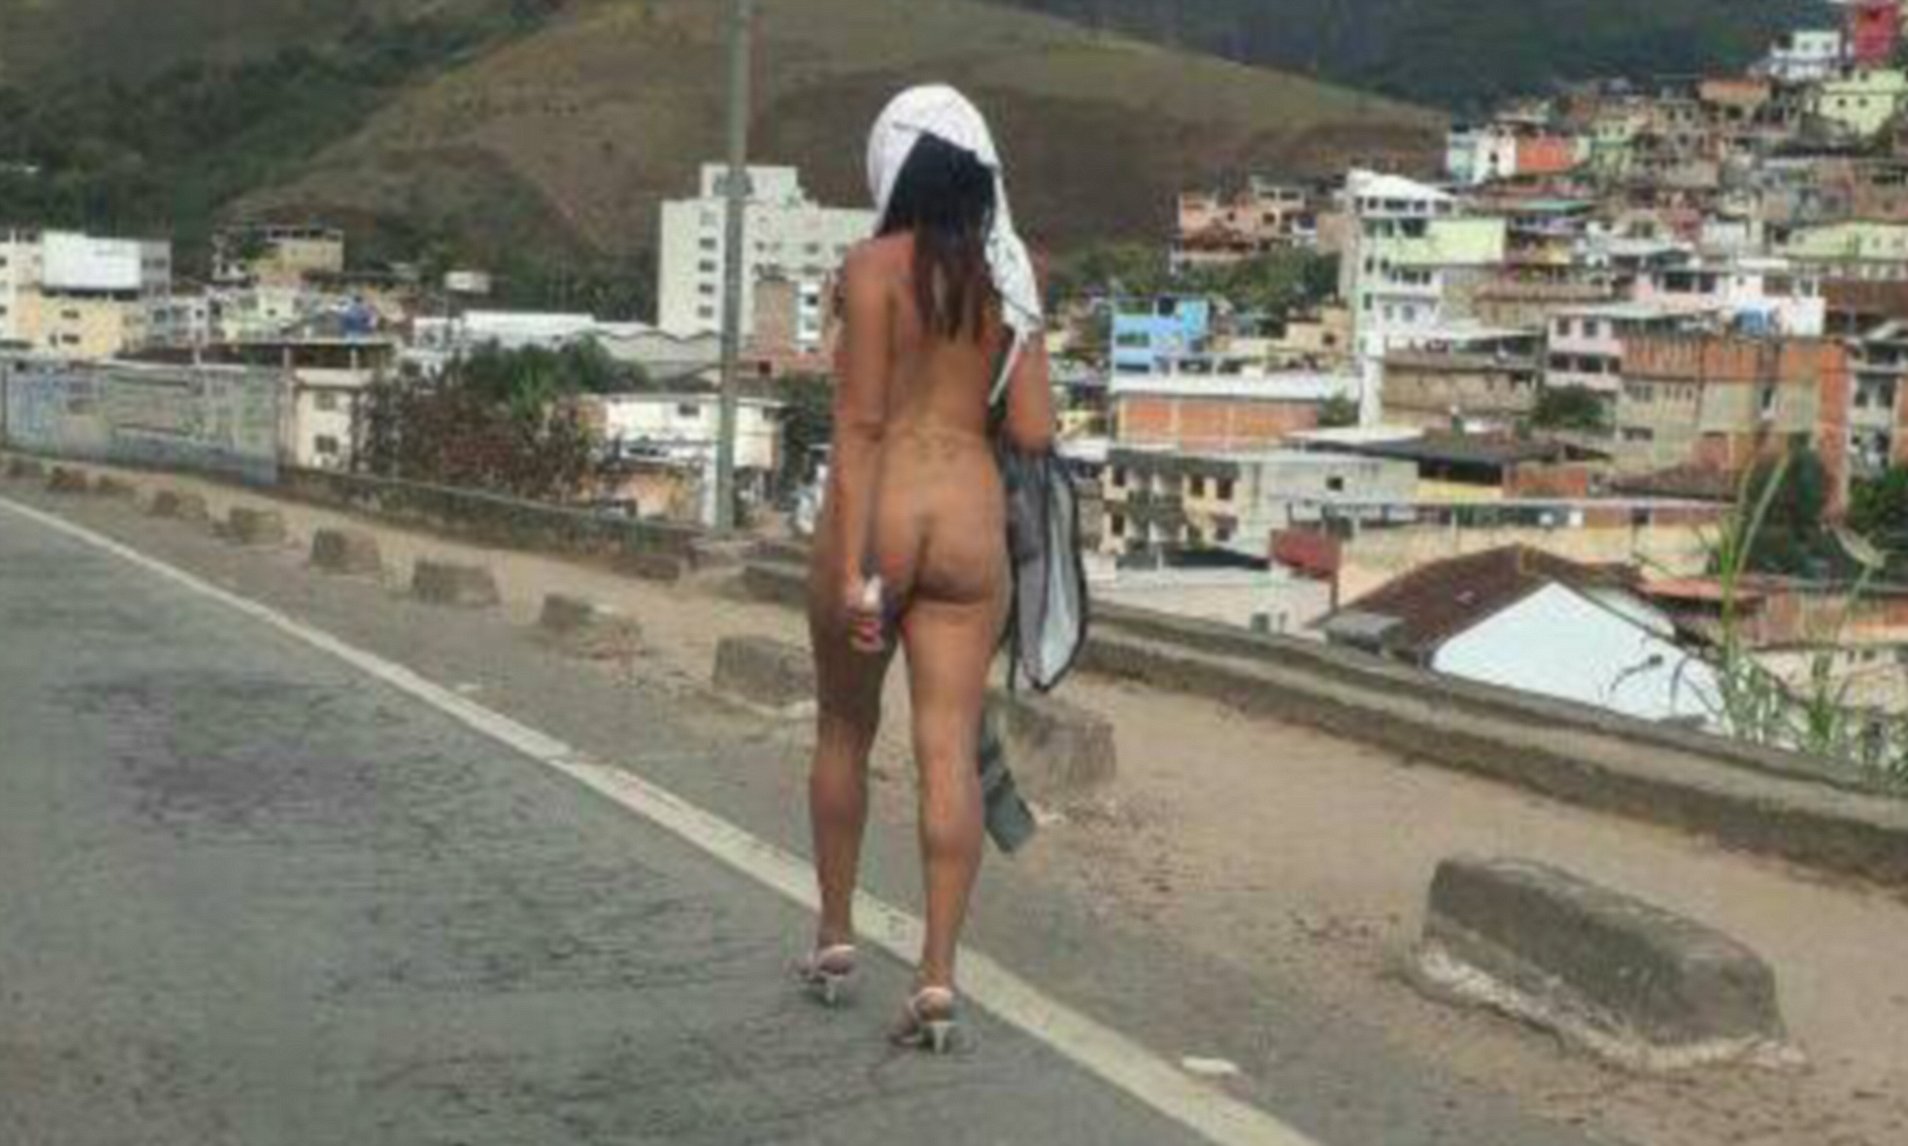 dennis guevara recommends woman naked in street pic